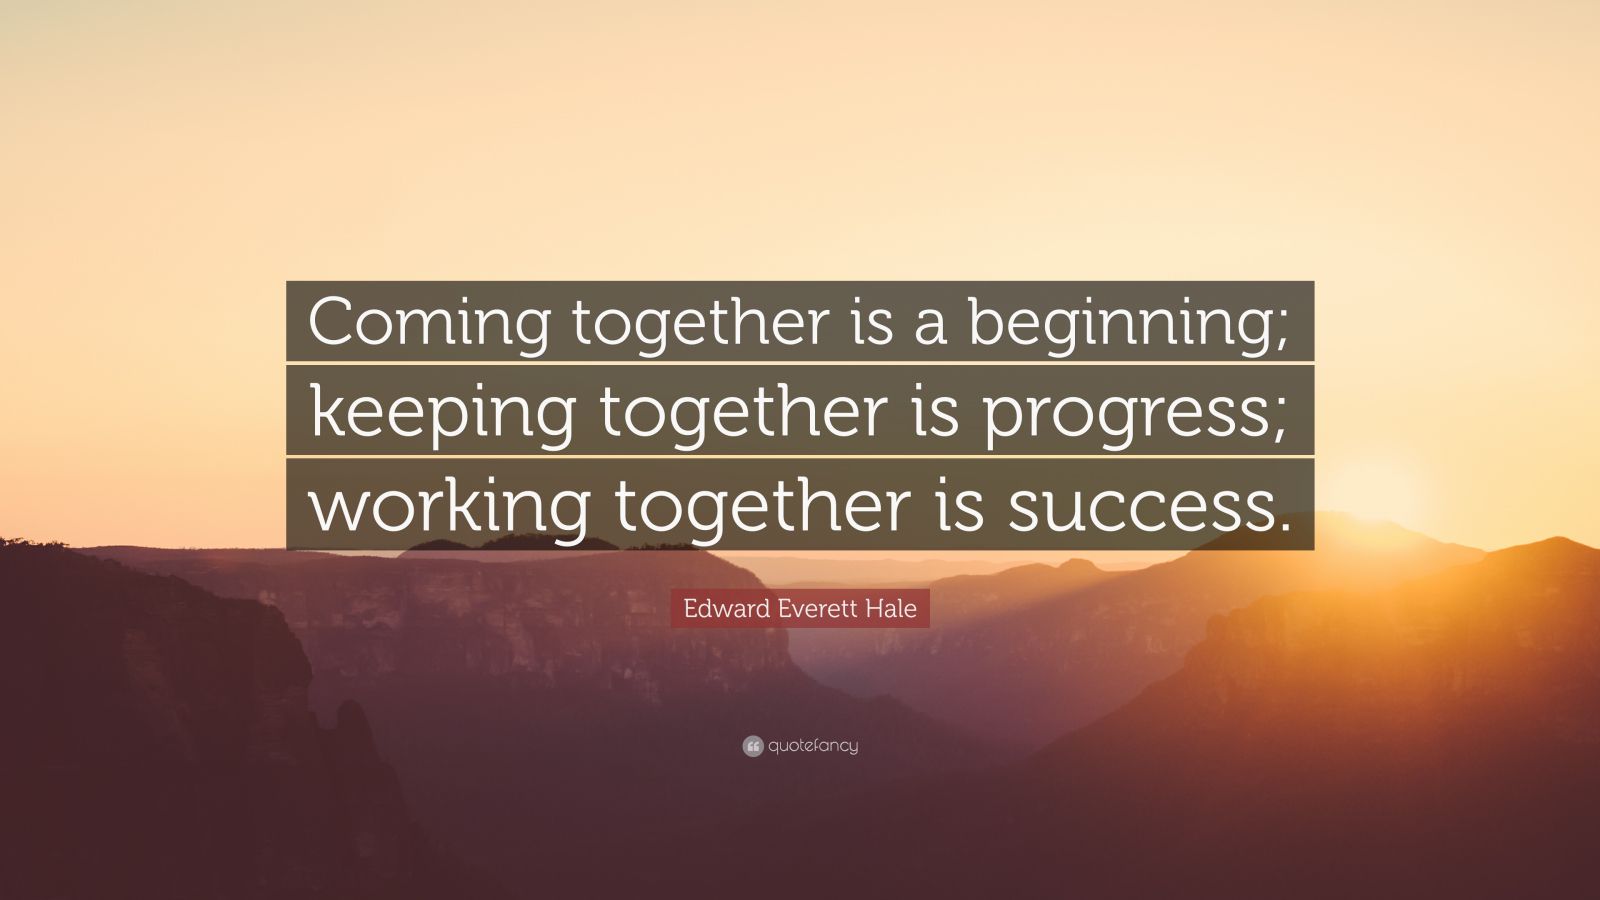 Edward Everett Hale Quote: “Coming together is a beginning; keeping ...